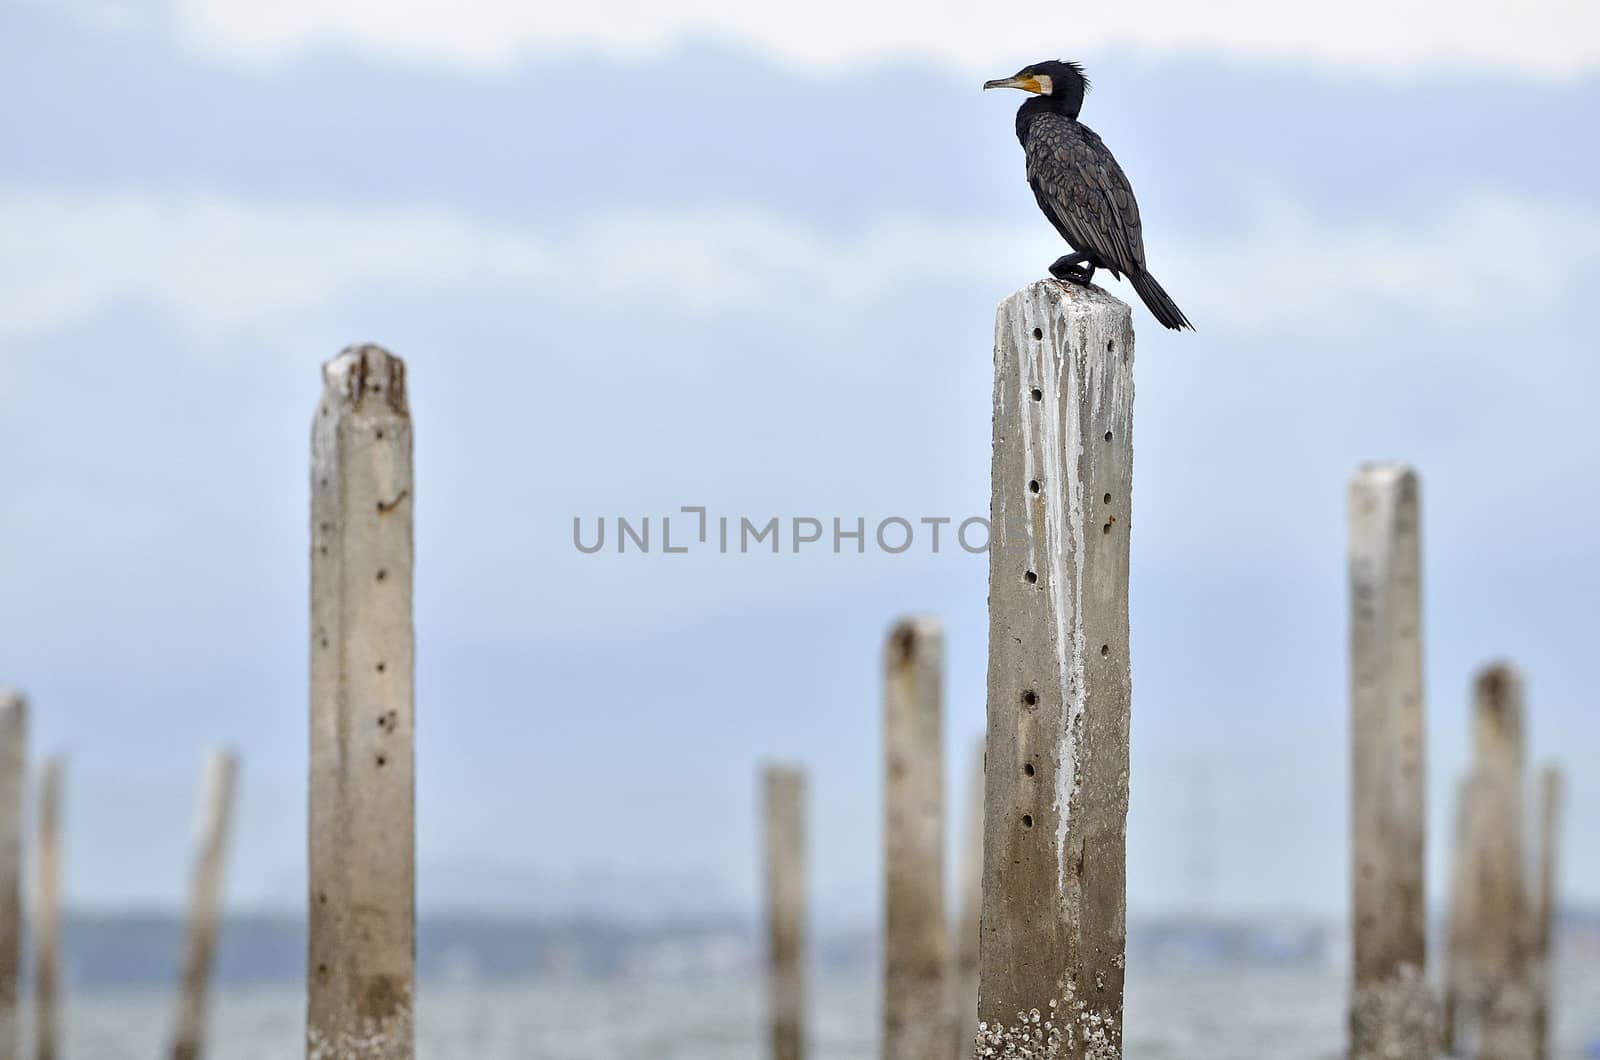 Great Cormorant resting after fishing, Samutsakorn,Thailand. by think4photop